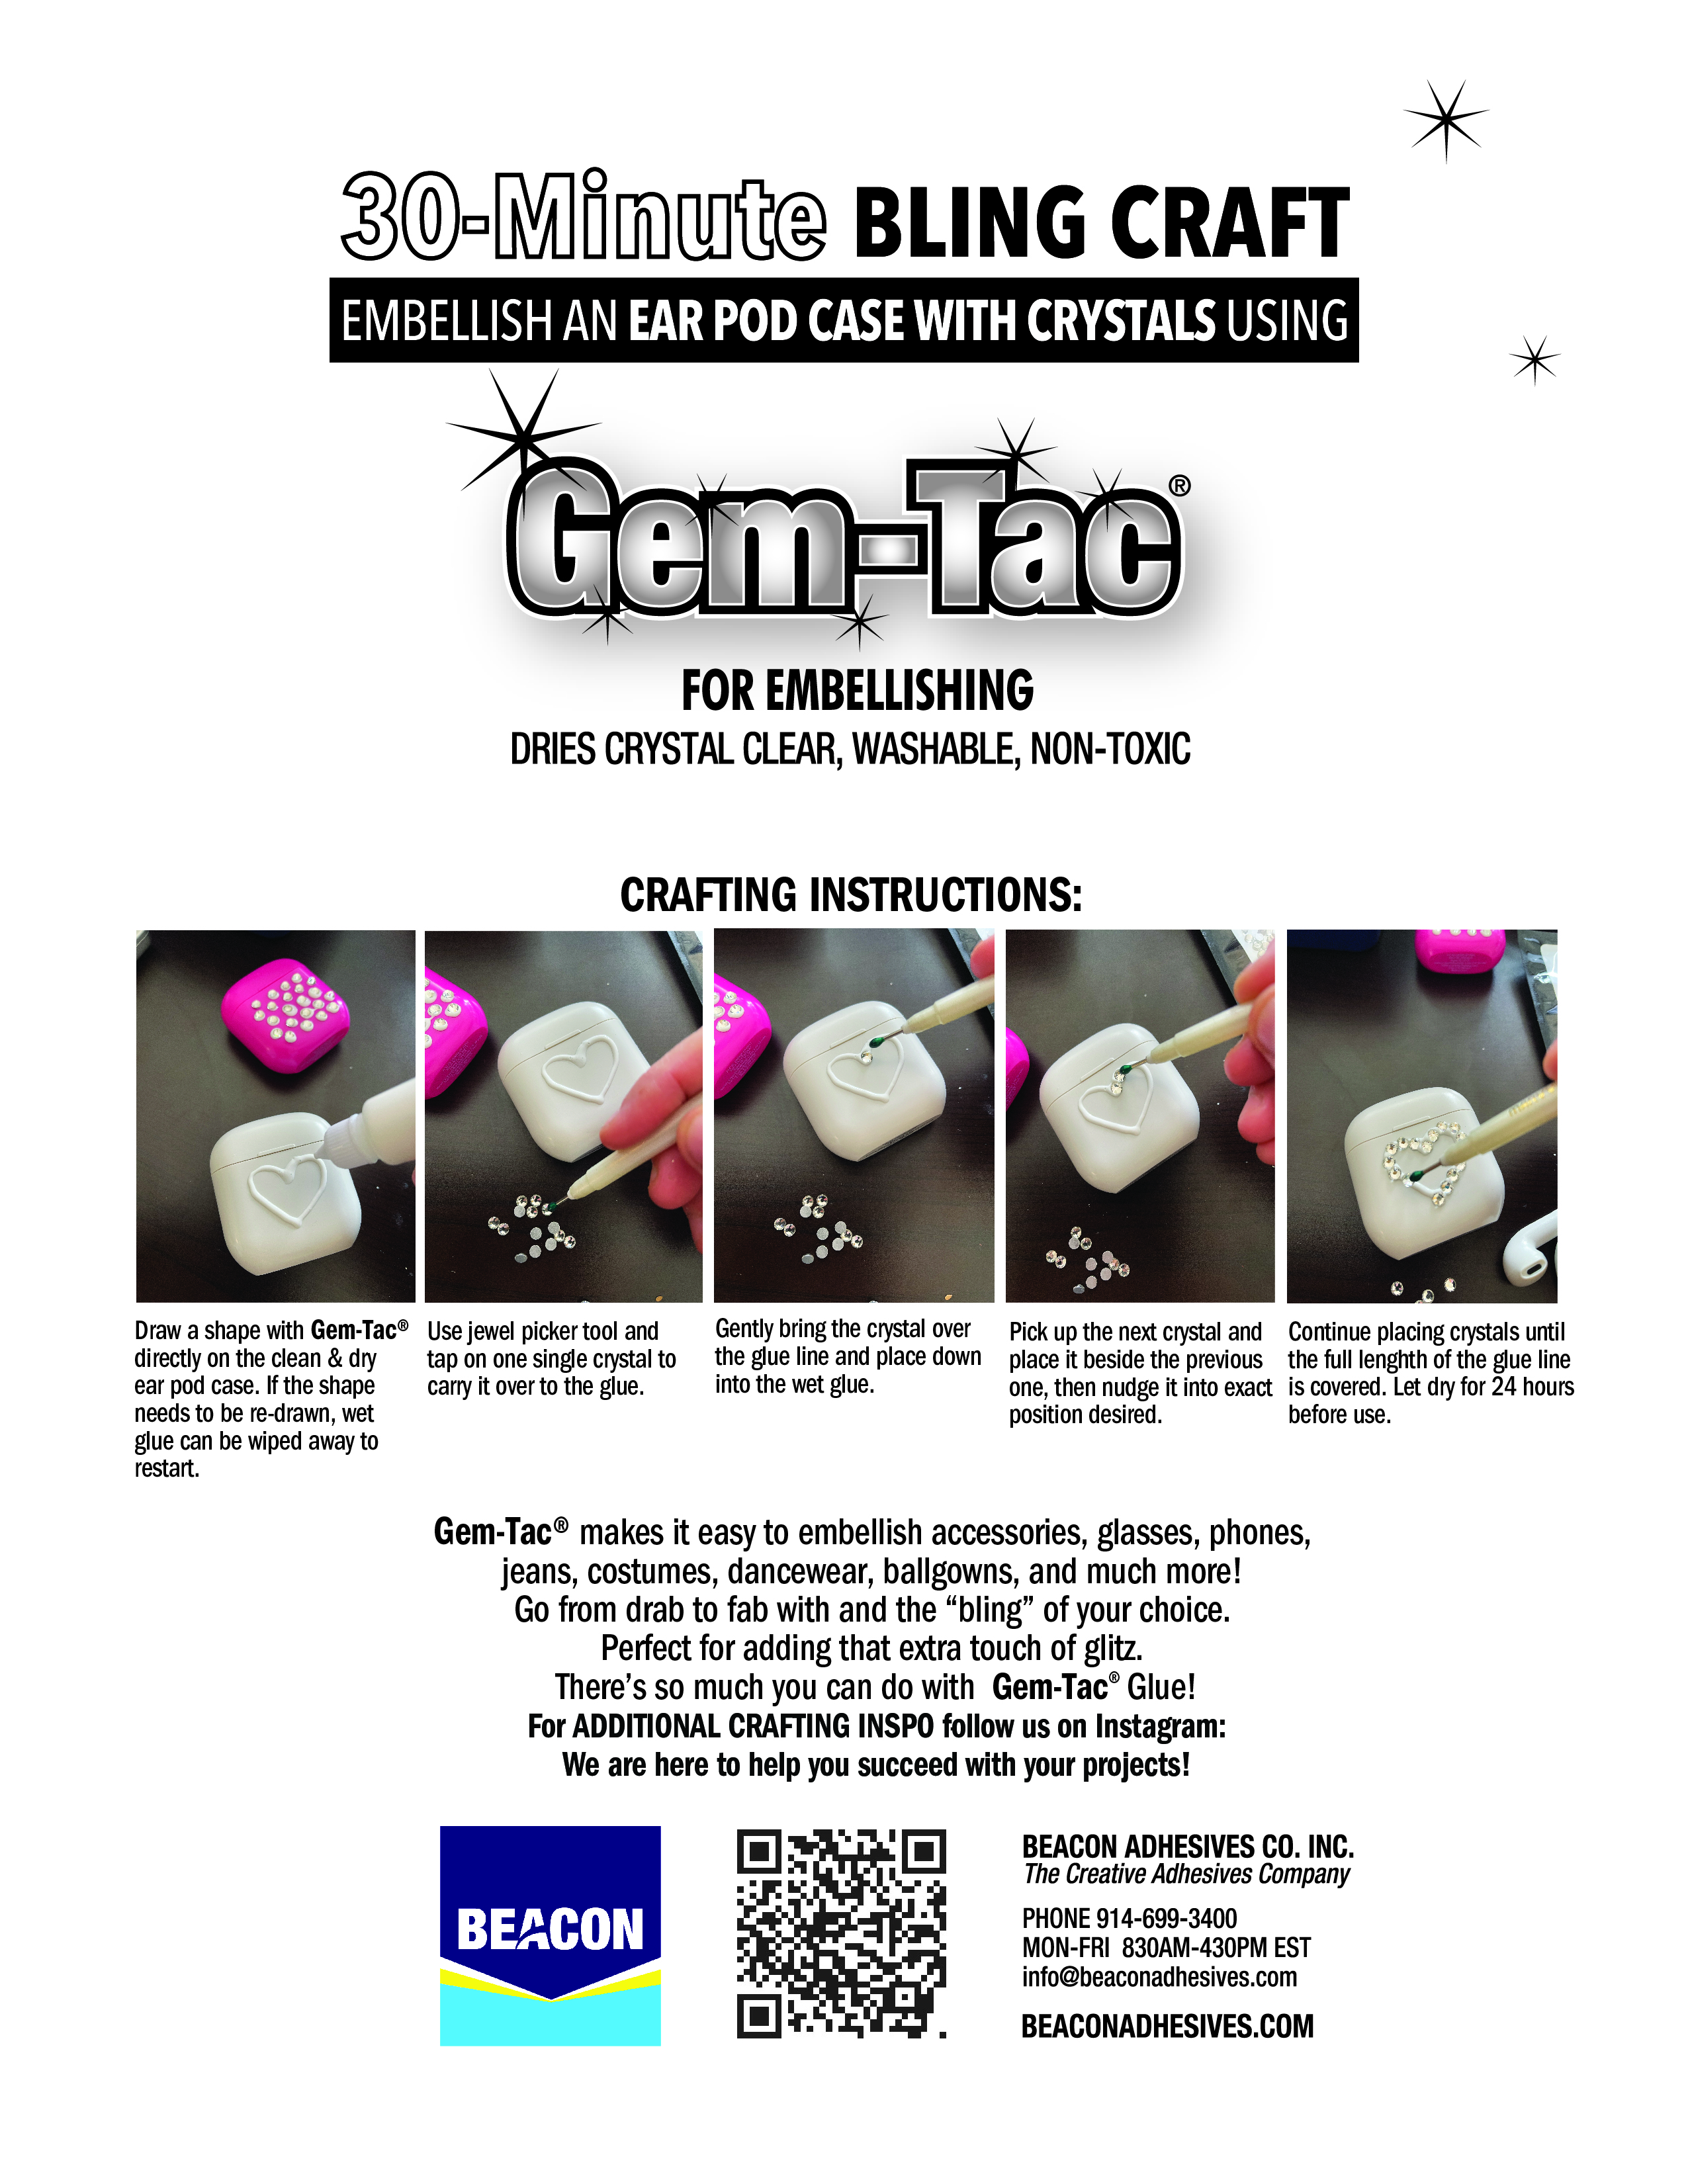 12 Pack: Beacon Gem-Tac Permanent Glue, Size: 4, Clear